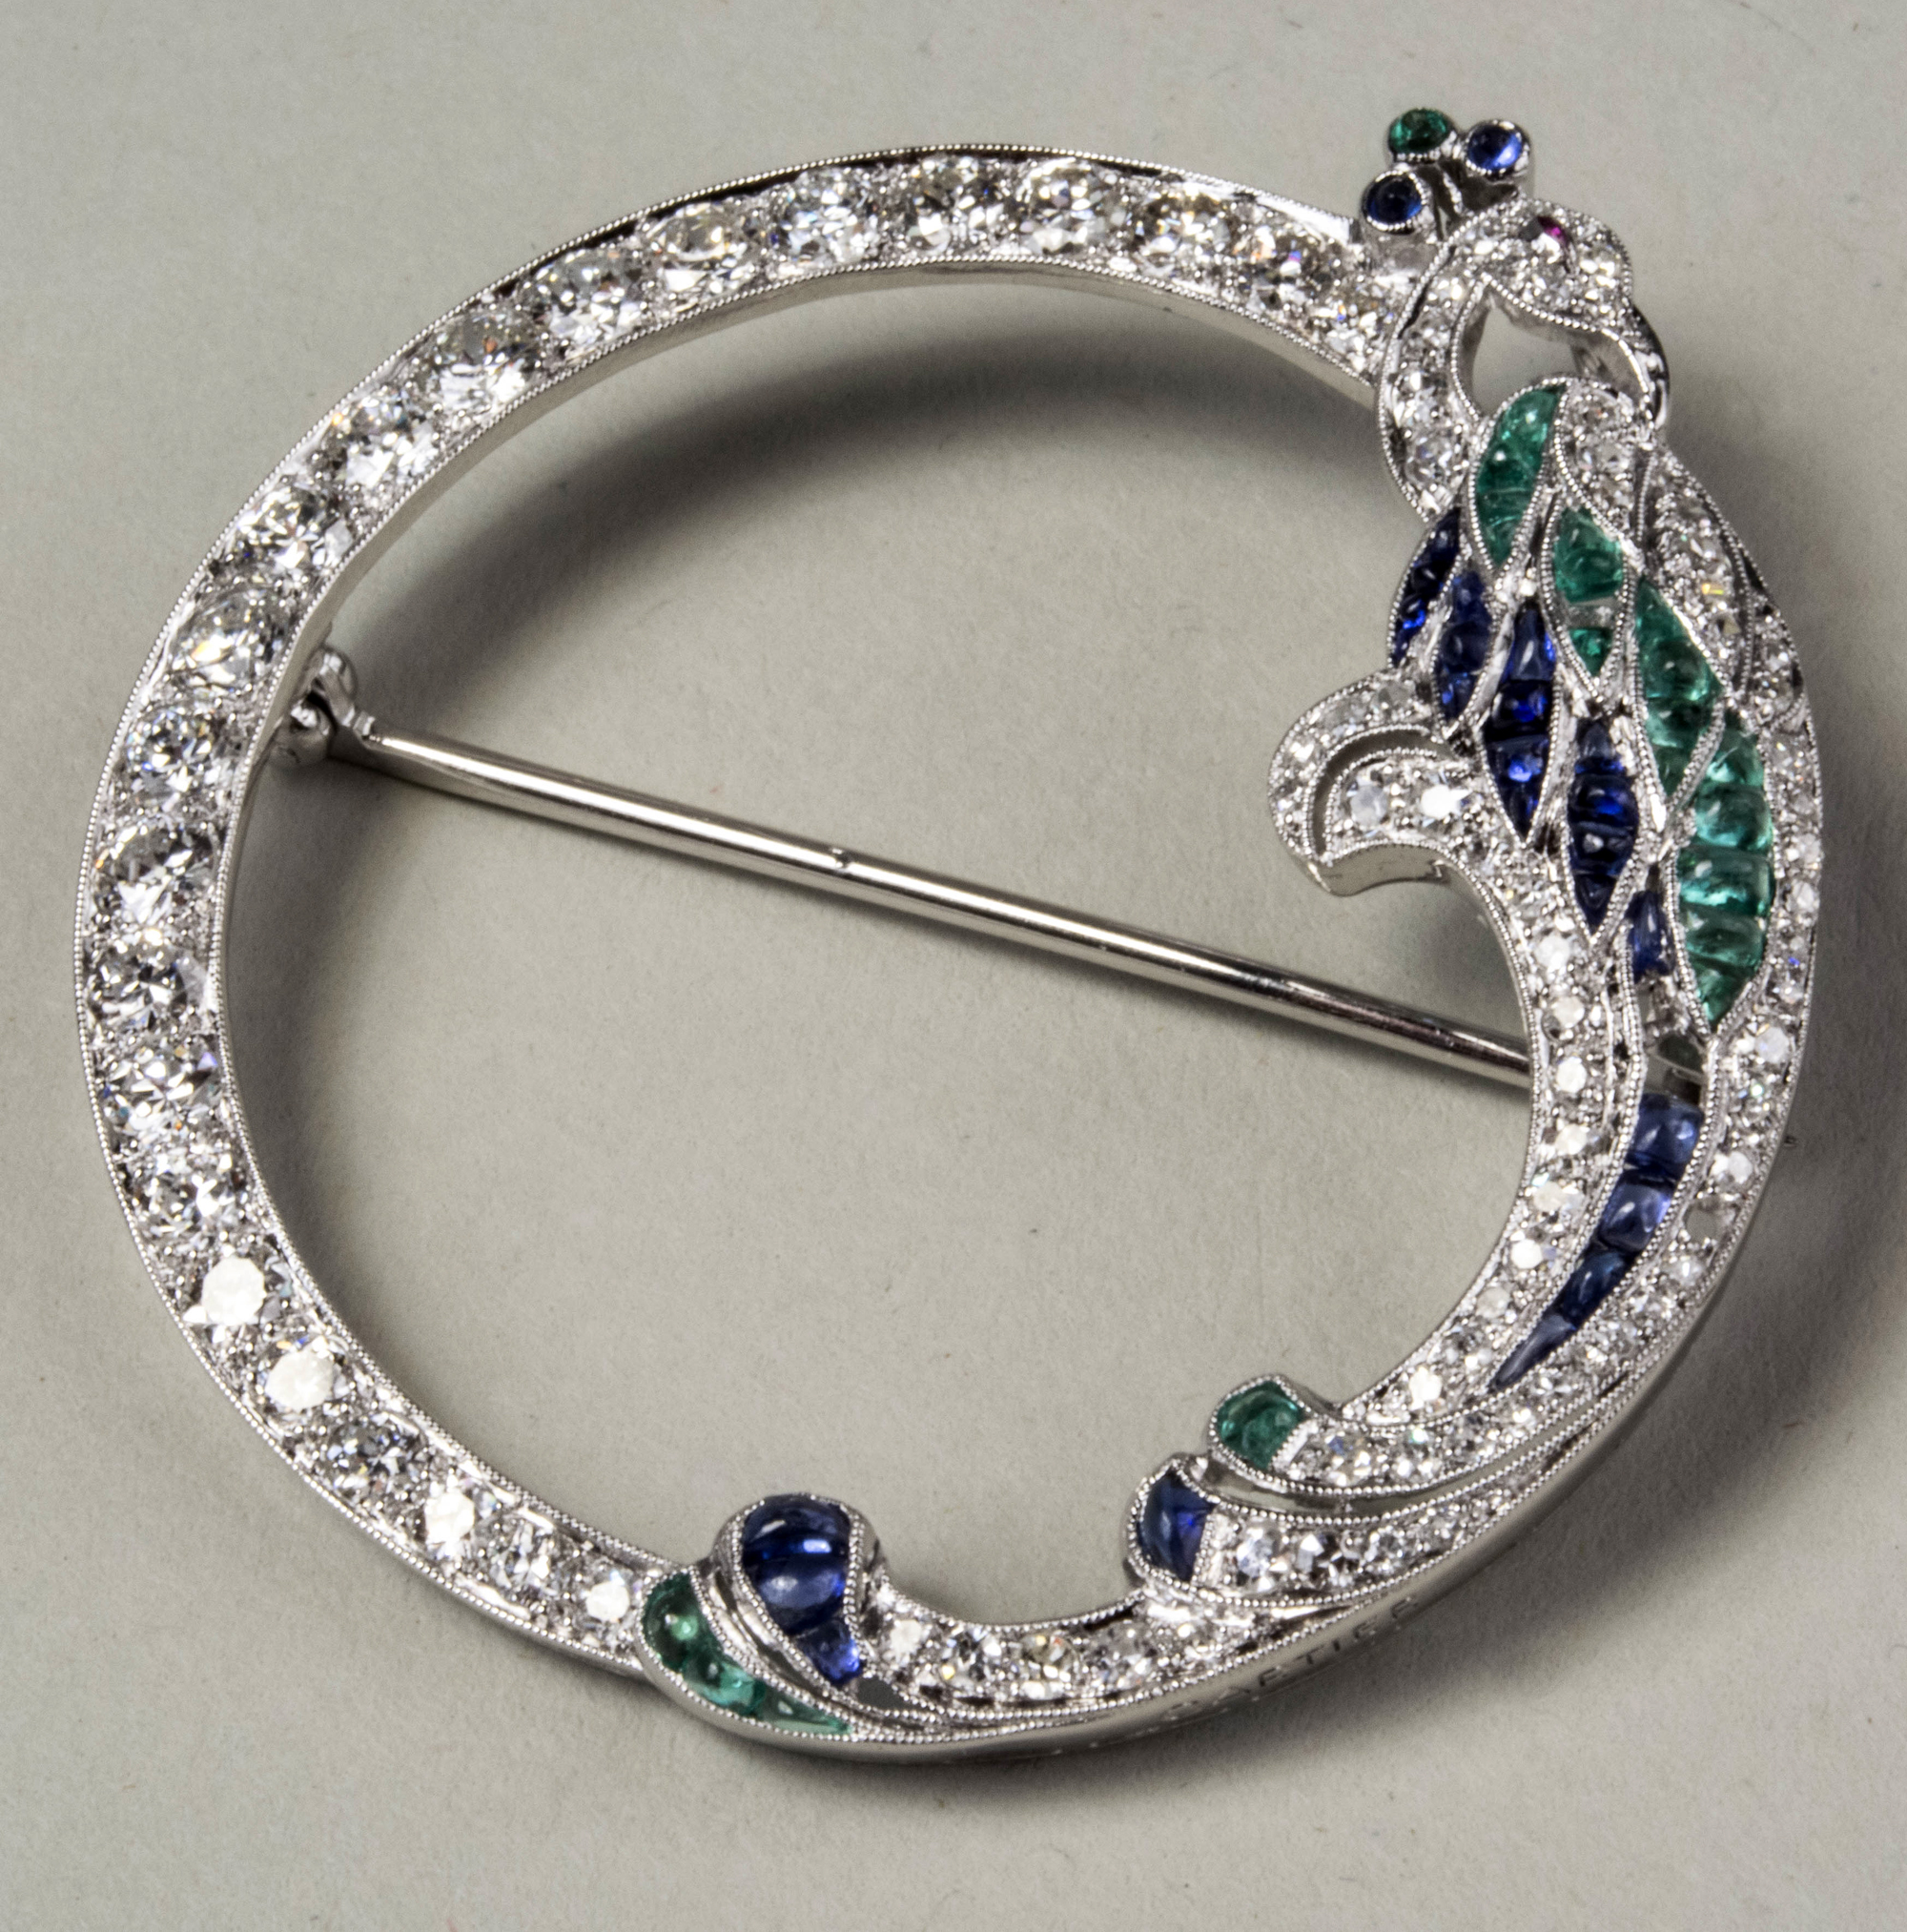 Cartier circle pin, platinum with emerald and sapphire-accented bird of paradise on ring of graduated round diamonds. Est. $8,000-$12,000